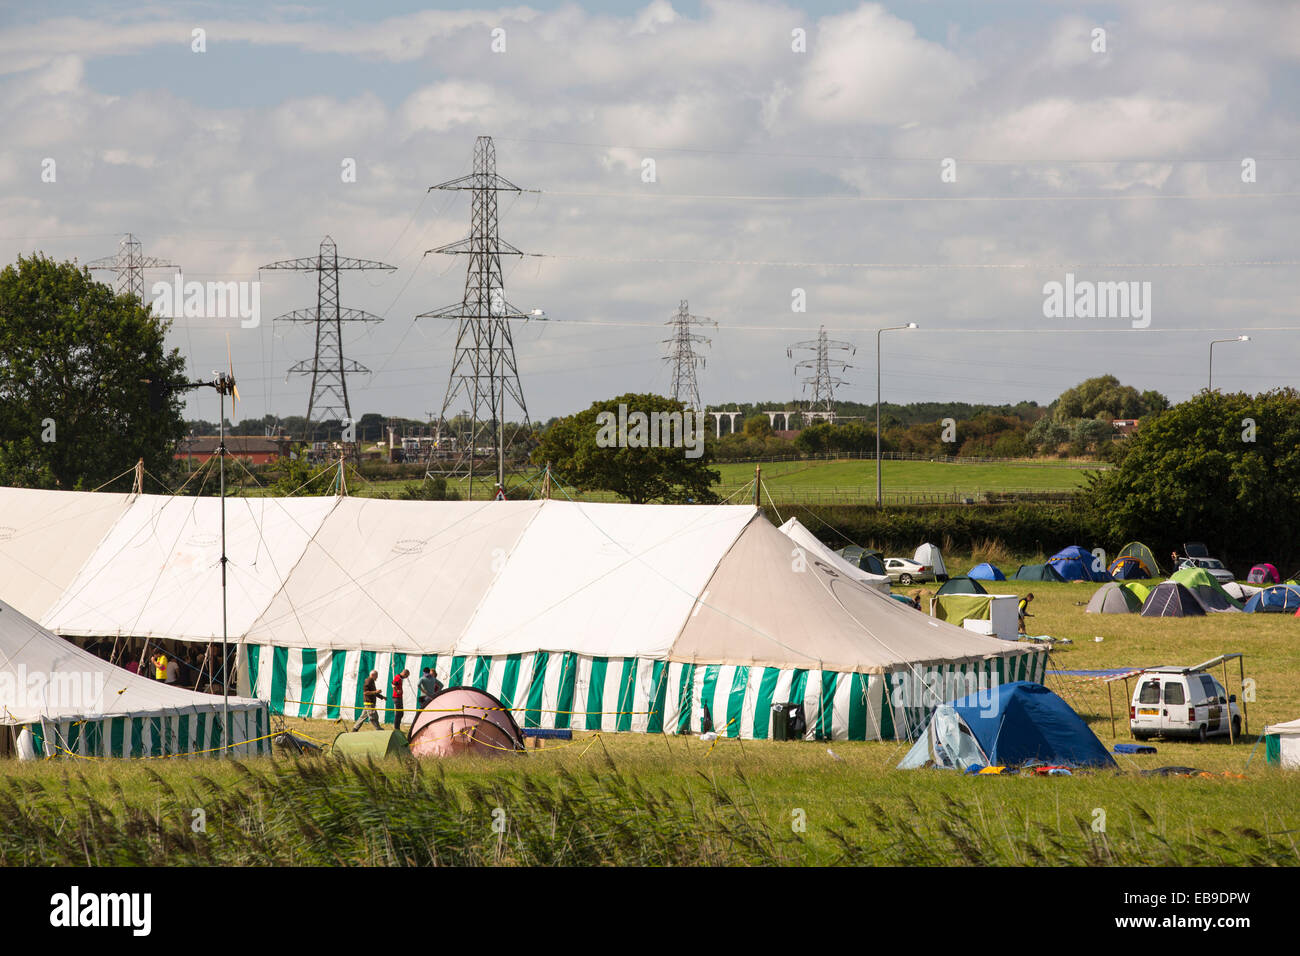 A protest camp against fracking at a farm site at Little Plumpton near Blackpool, Lancashire, UK, where the council for the first time in the UK, has granted planning permission for commercial fracking fro shale gas, by Cuadrilla. Stock Photo